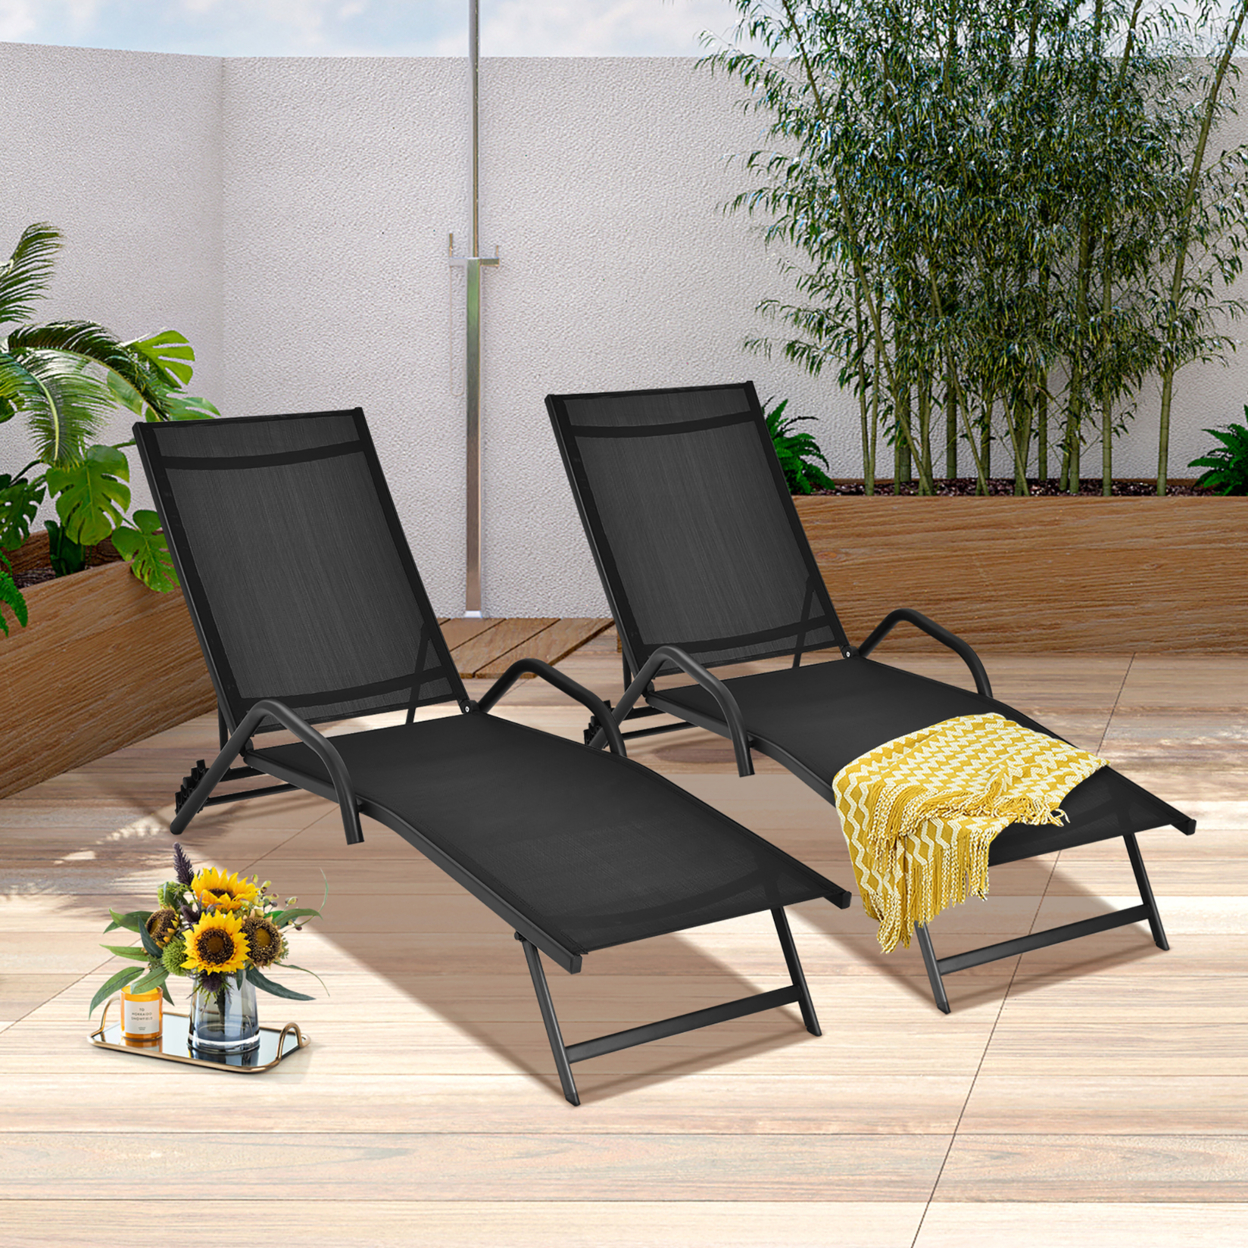 2PCS Outdoor Patio Chaise Reclining Lounge Chairs W/ 5-Position Adjust Backrest